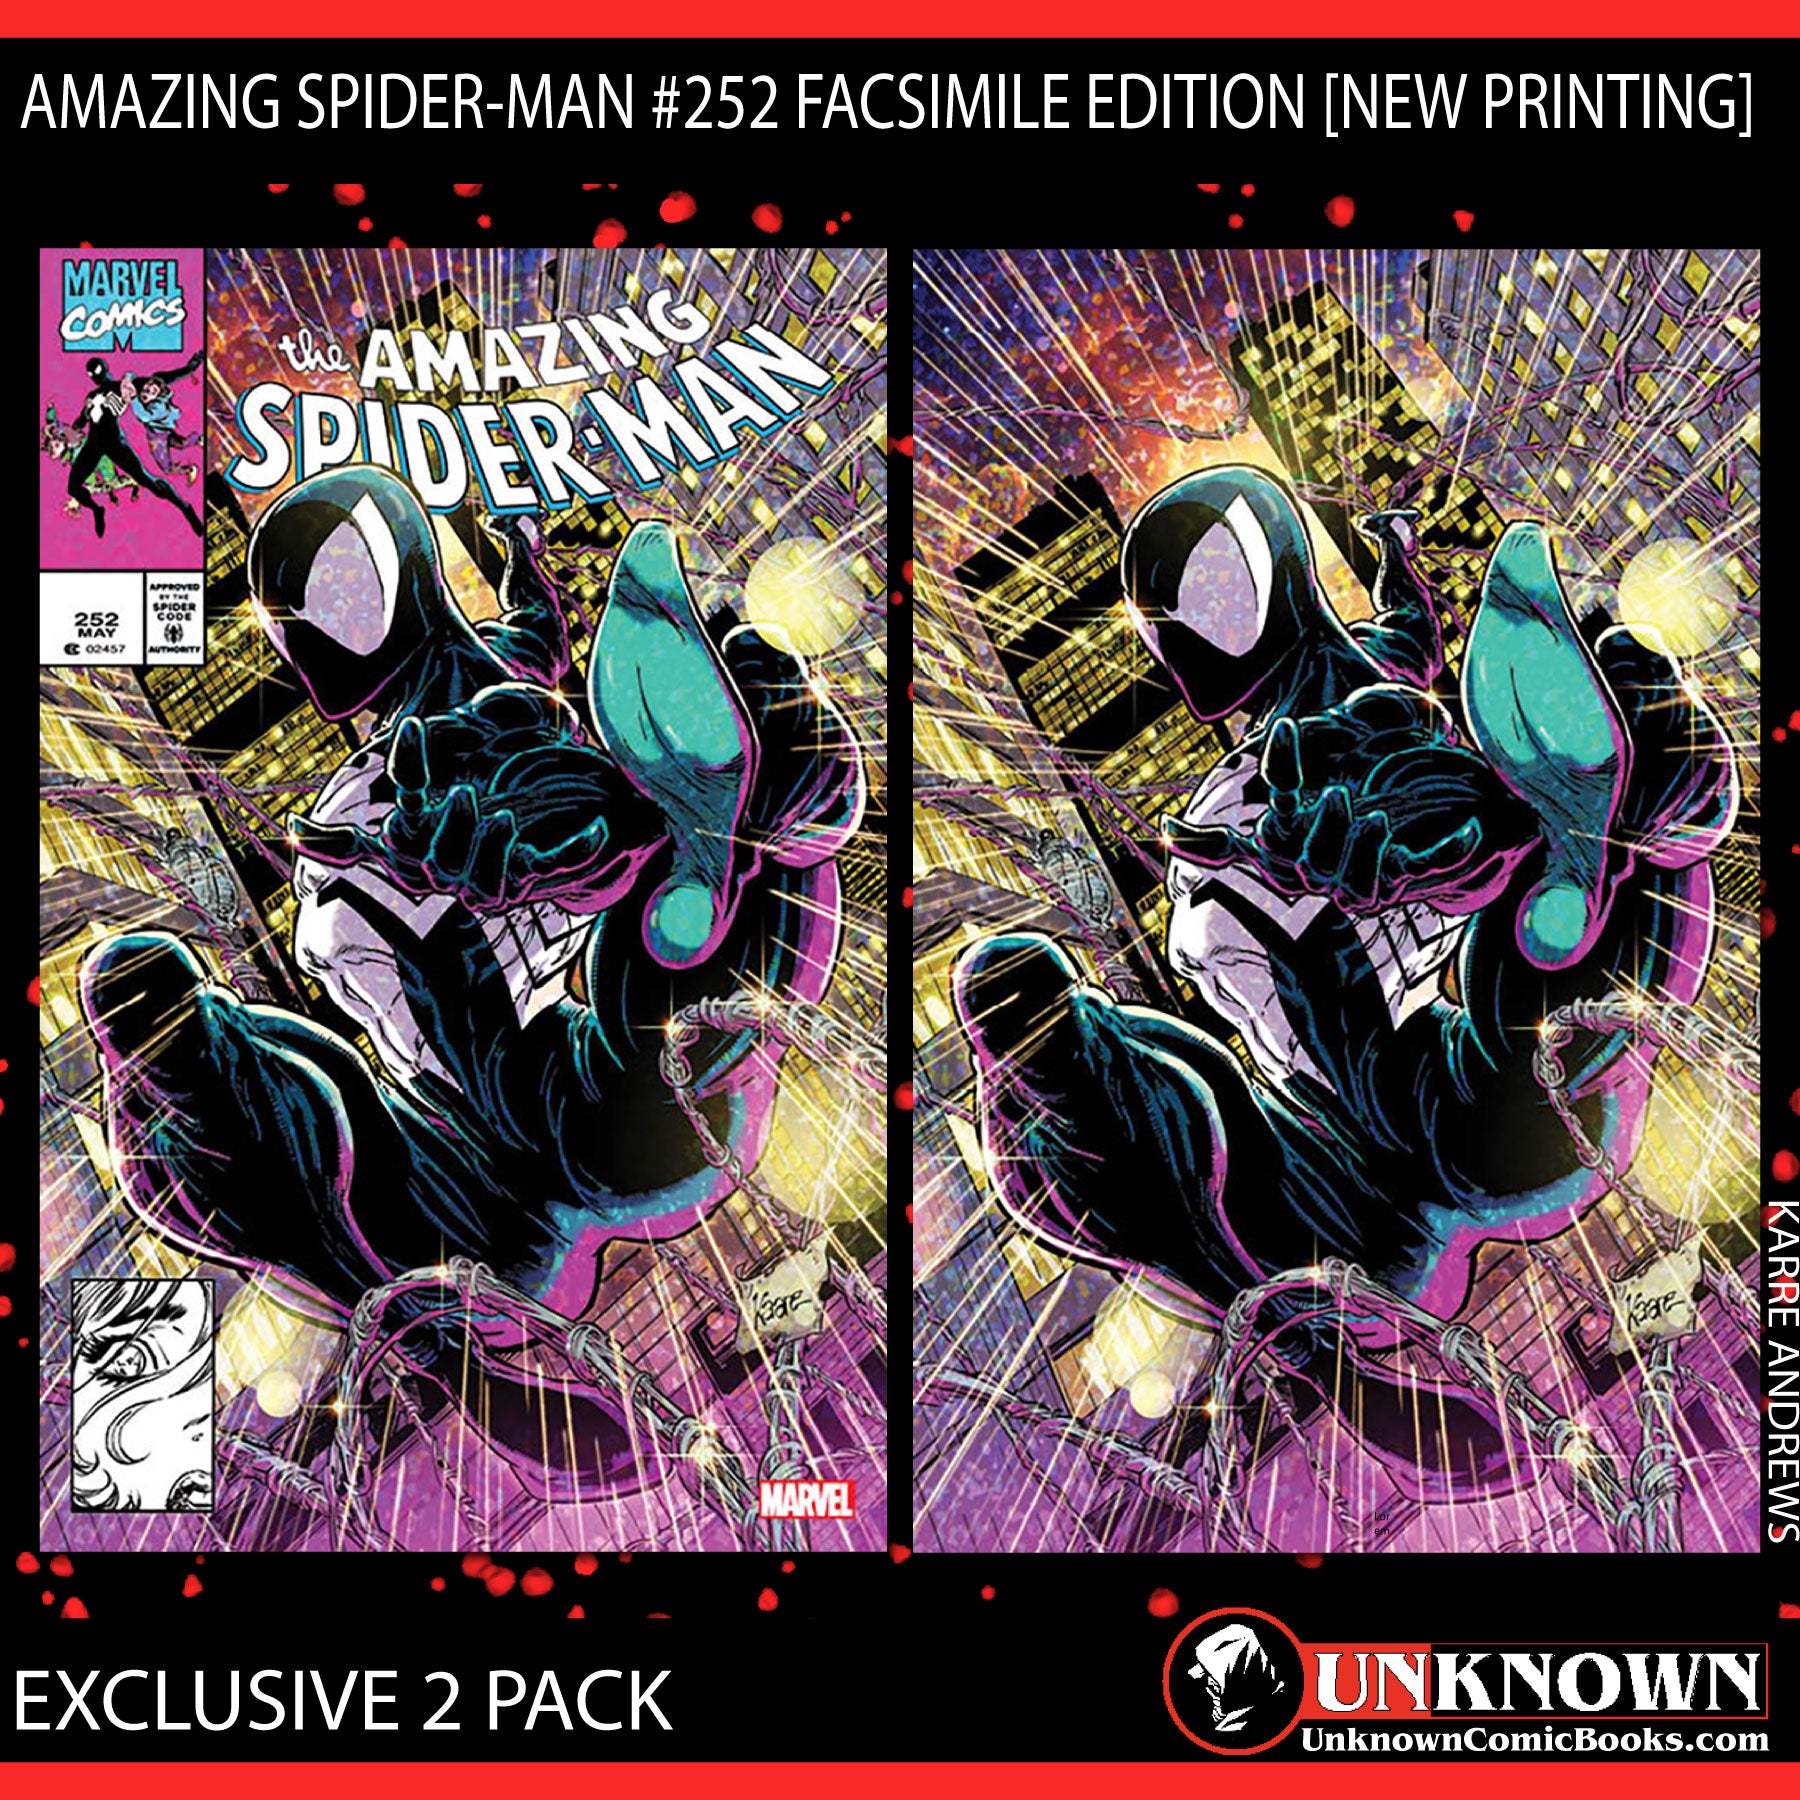 [2 PACK] AMAZING SPIDER-MAN #252 FACSIMILE EDITION [NEW PRINTING] UNKNOWN COMICS KAARE ANDREWS EXCLUSIVE VAR (01/31/2024)